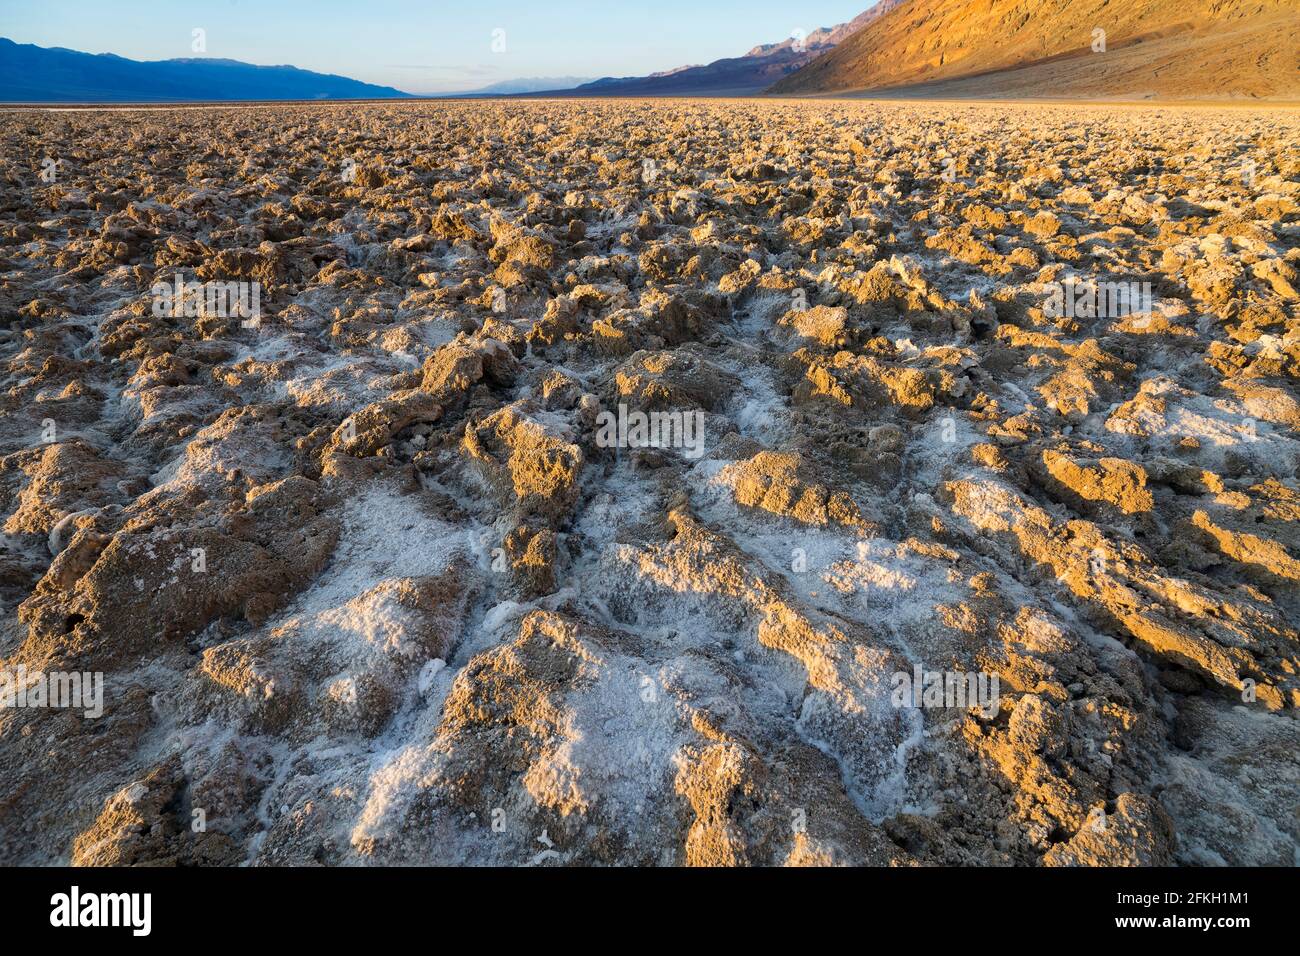 Devil's Golf Course at Badwater  Basin, Death Valley National Park, California.  Iconic chalky-white salt flats located 282 ft. below sea level. Stock Photo